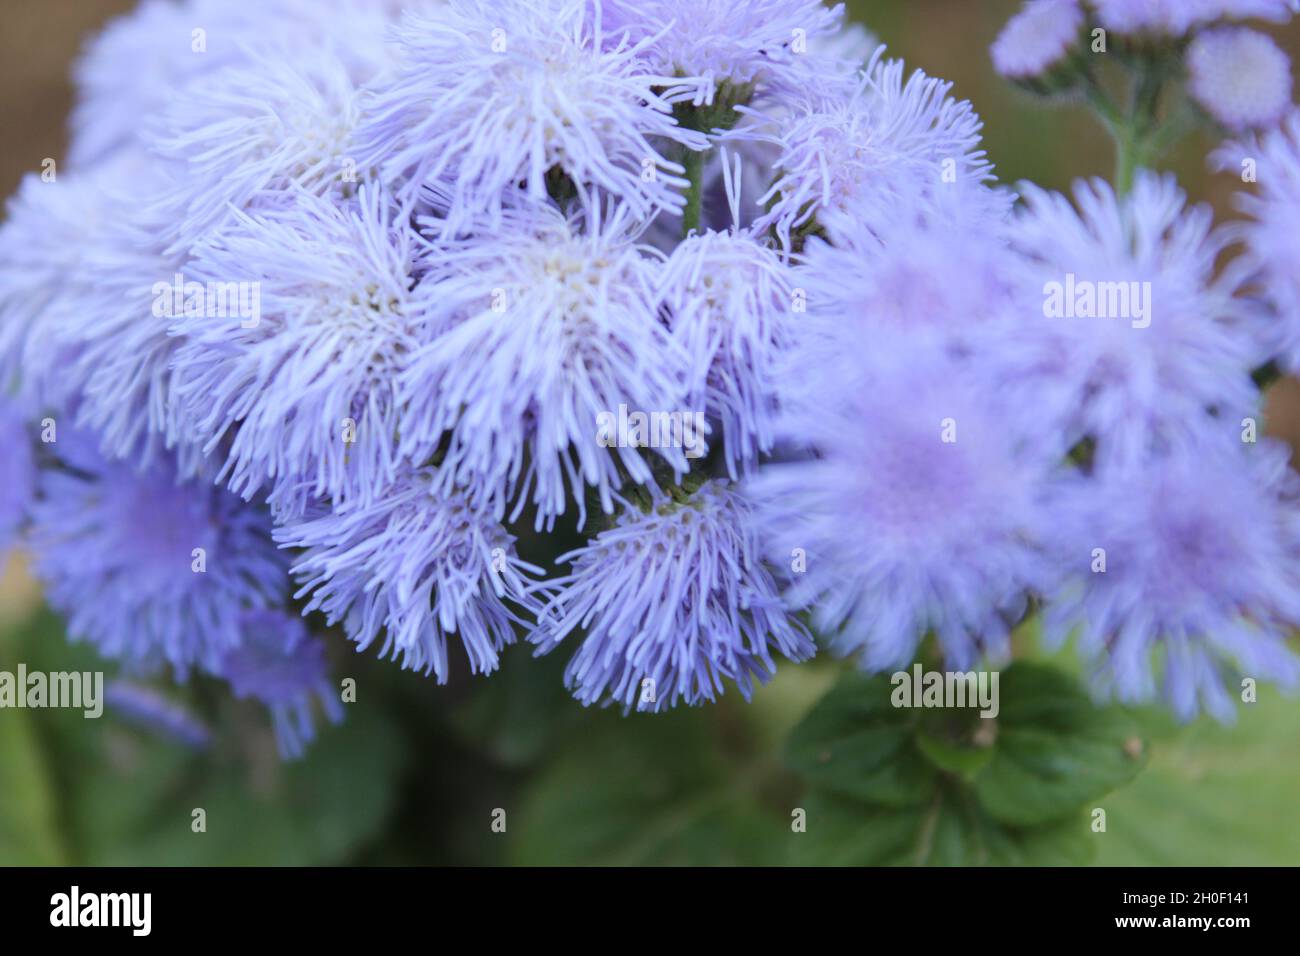 Flowering plant flower Plant fragility vulnerability beauty in Nature Freshness Growth close-up petal inflorescence flower head Nature purple focus on Stock Photo